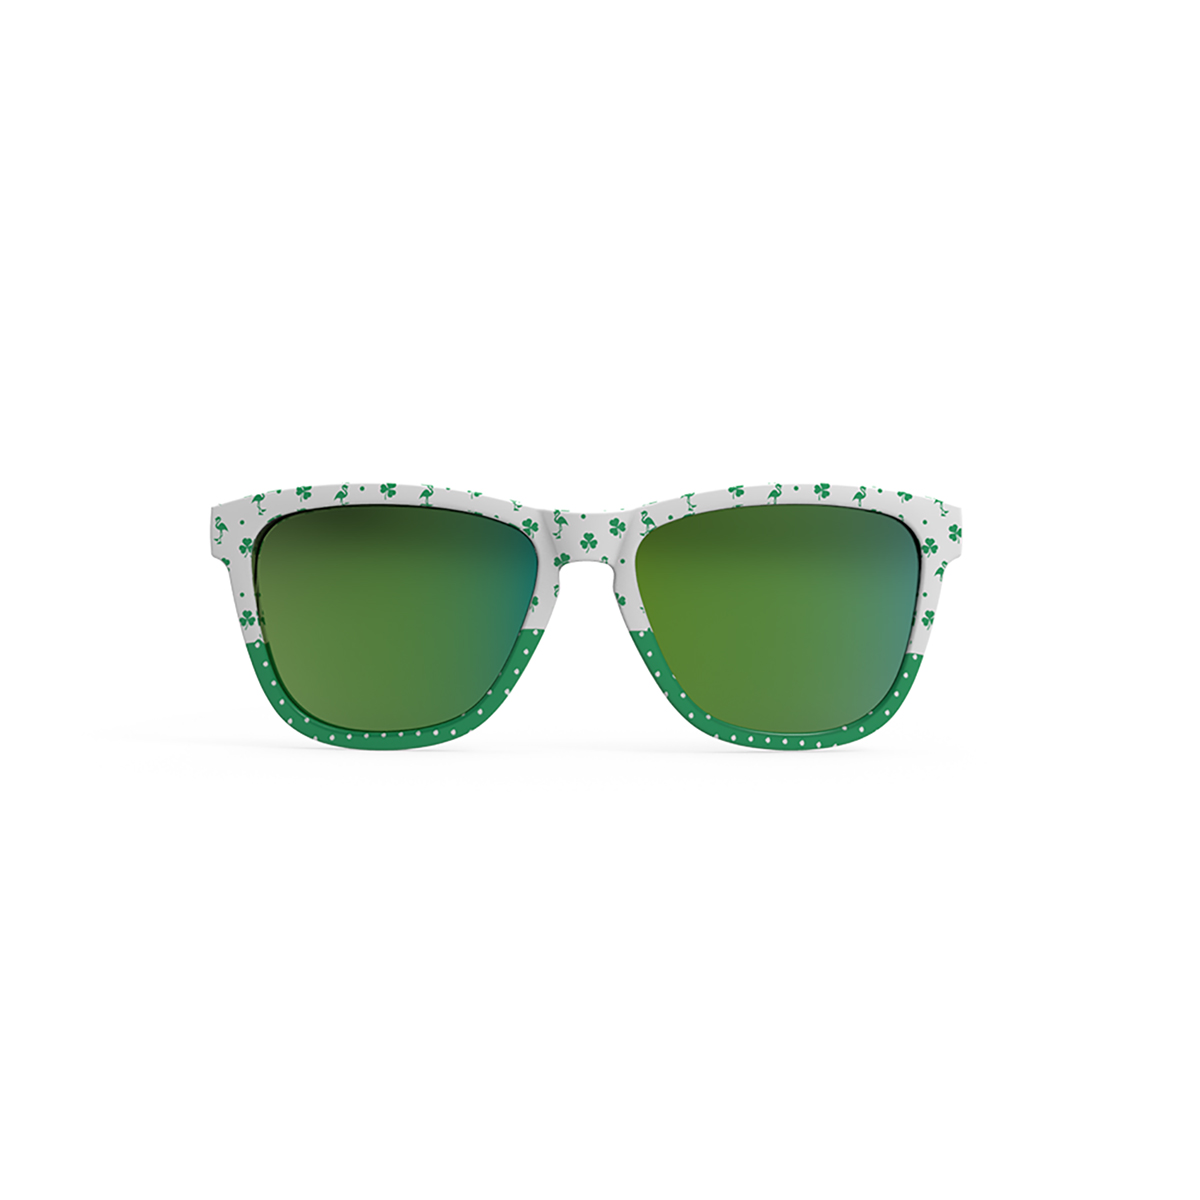 Goodr St. Patrick's Limited Edition Sunglasses, , large image number null